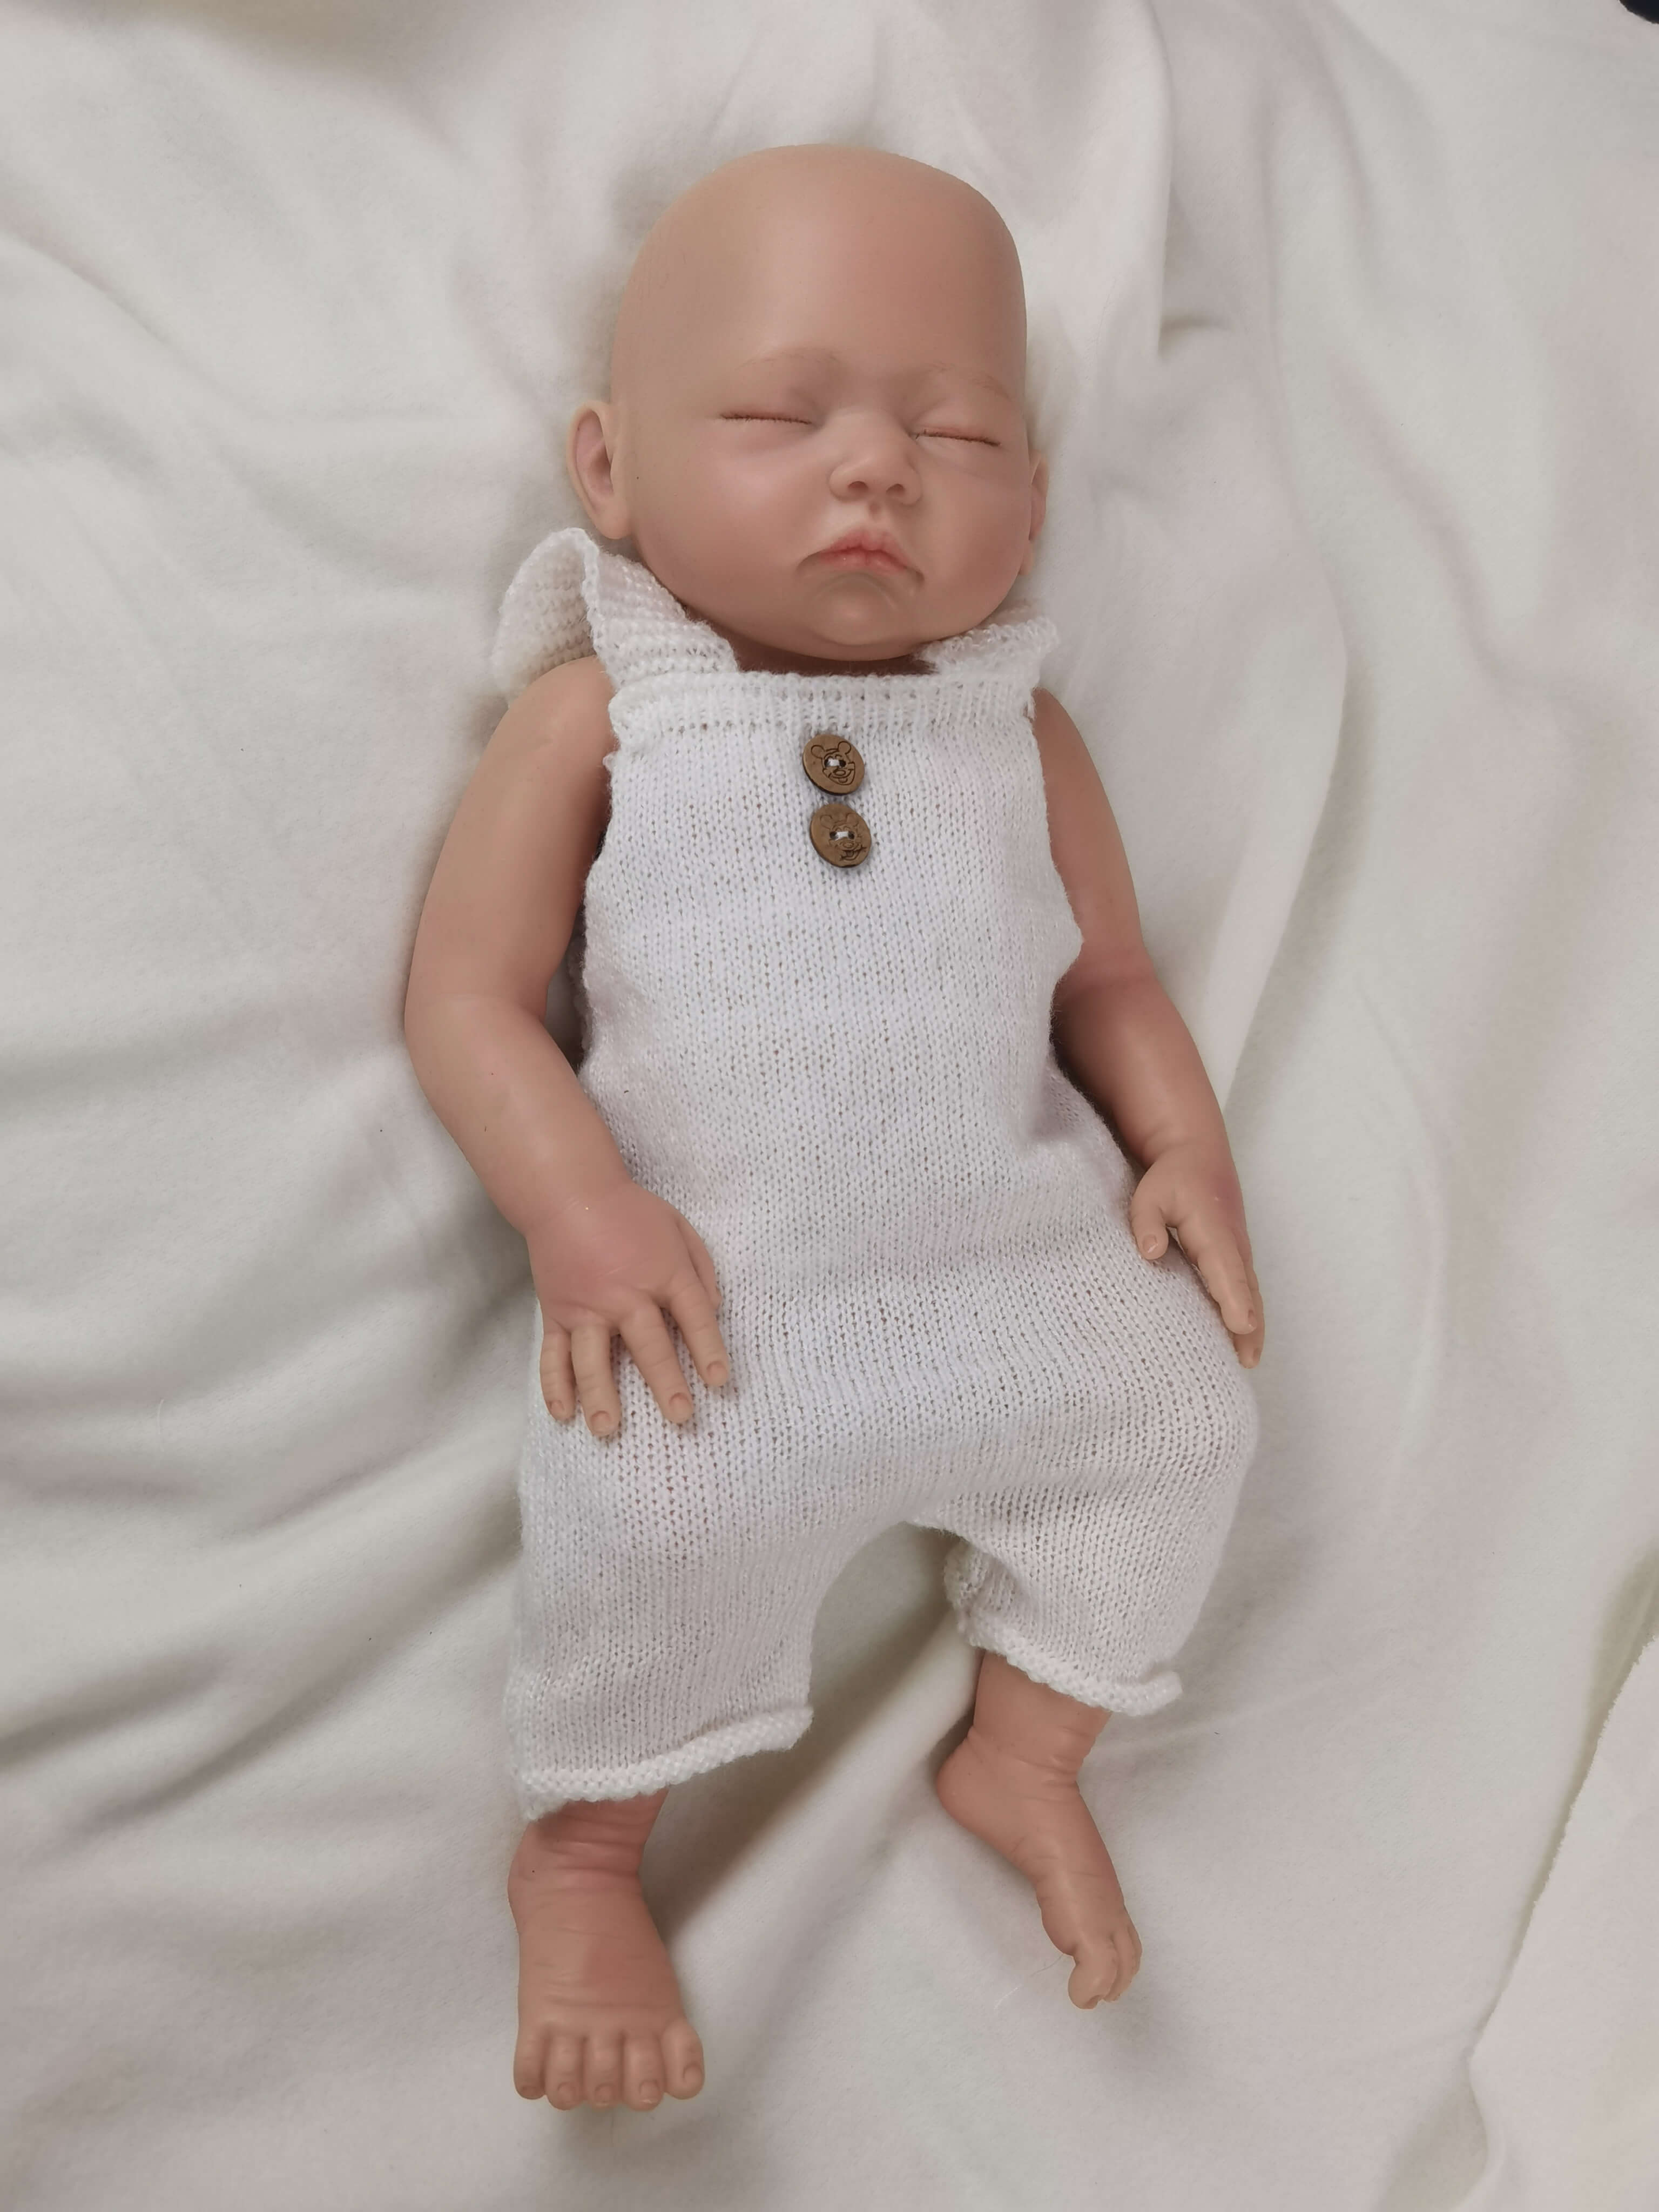 Sleeping Reborn Baby Dolls, 18 Inch Full Silicone Newborn Baby Boy Doll, Realistic Weighted Baby Reborn Toddler Doll for Kids